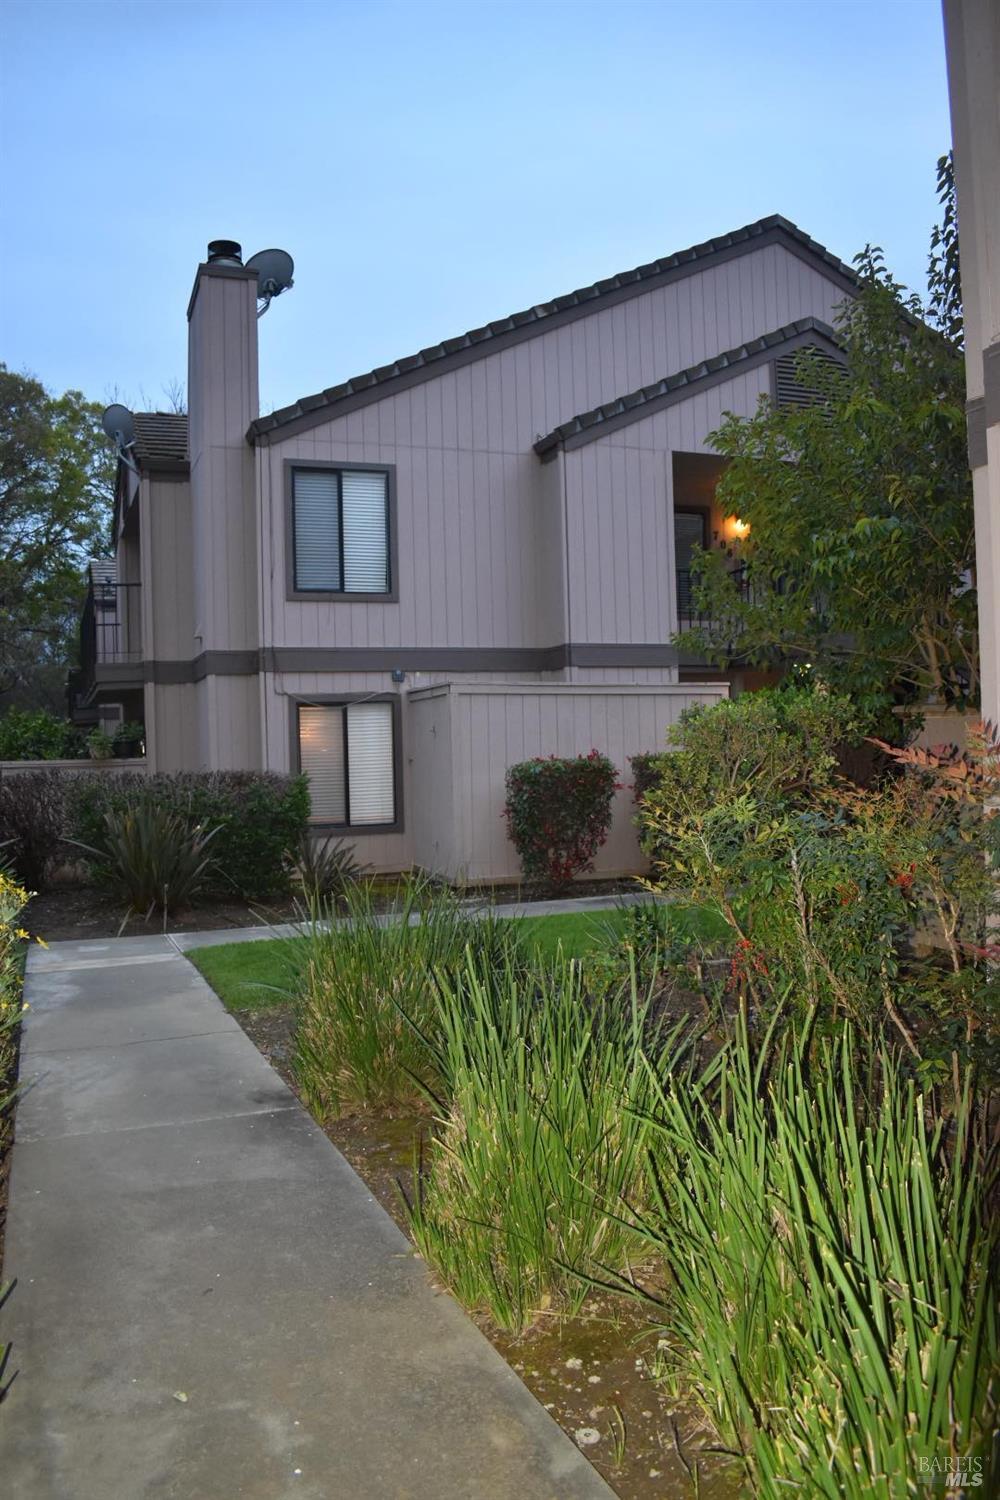 Photo of 1801 Marshall Rd #708 in Vacaville, CA